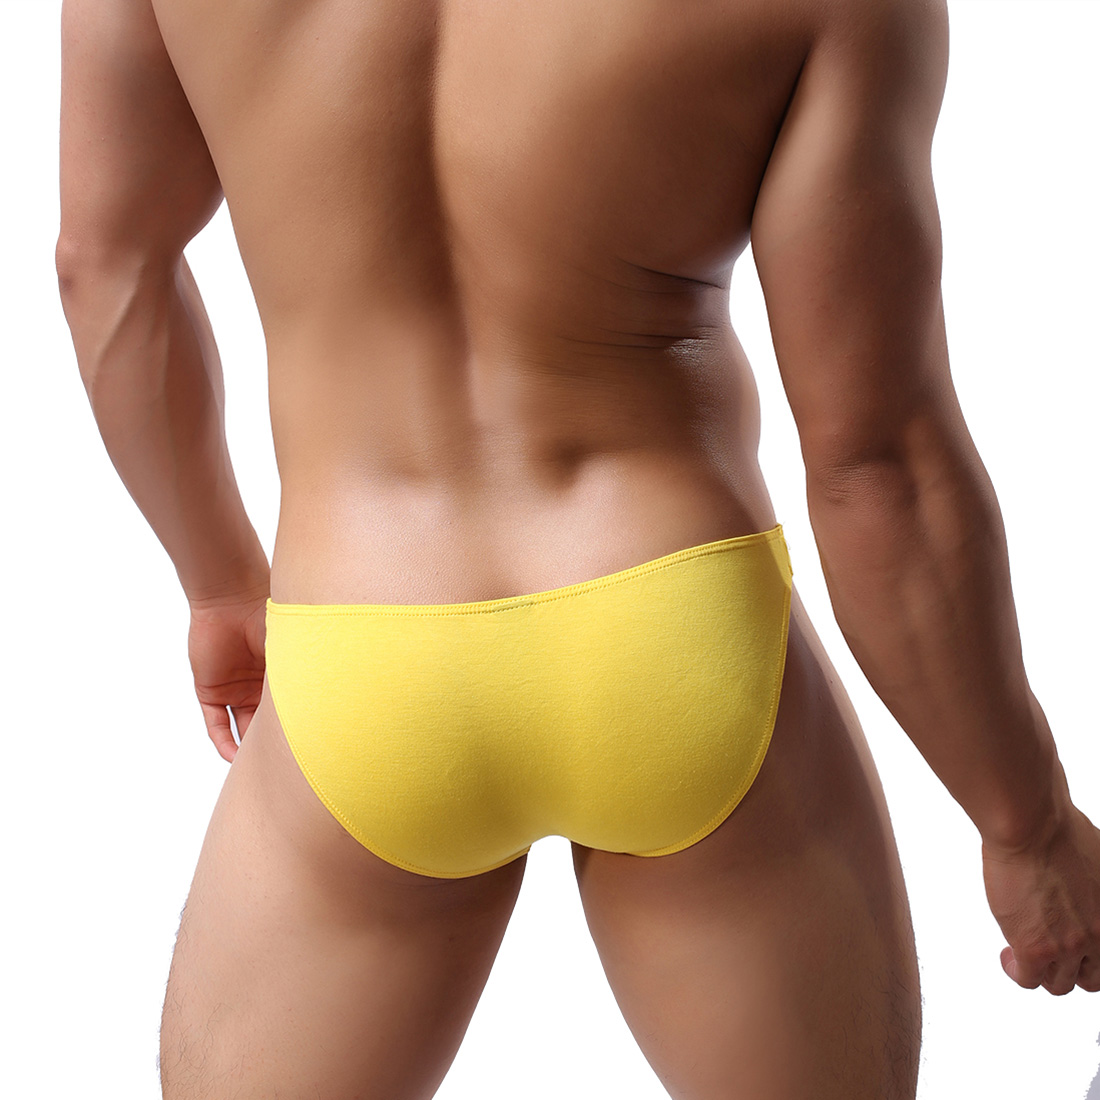 Men's Sexy Lingerie Underwear Modal Triangle Pants Shorts with Penis Sheath WH8 Yellow M